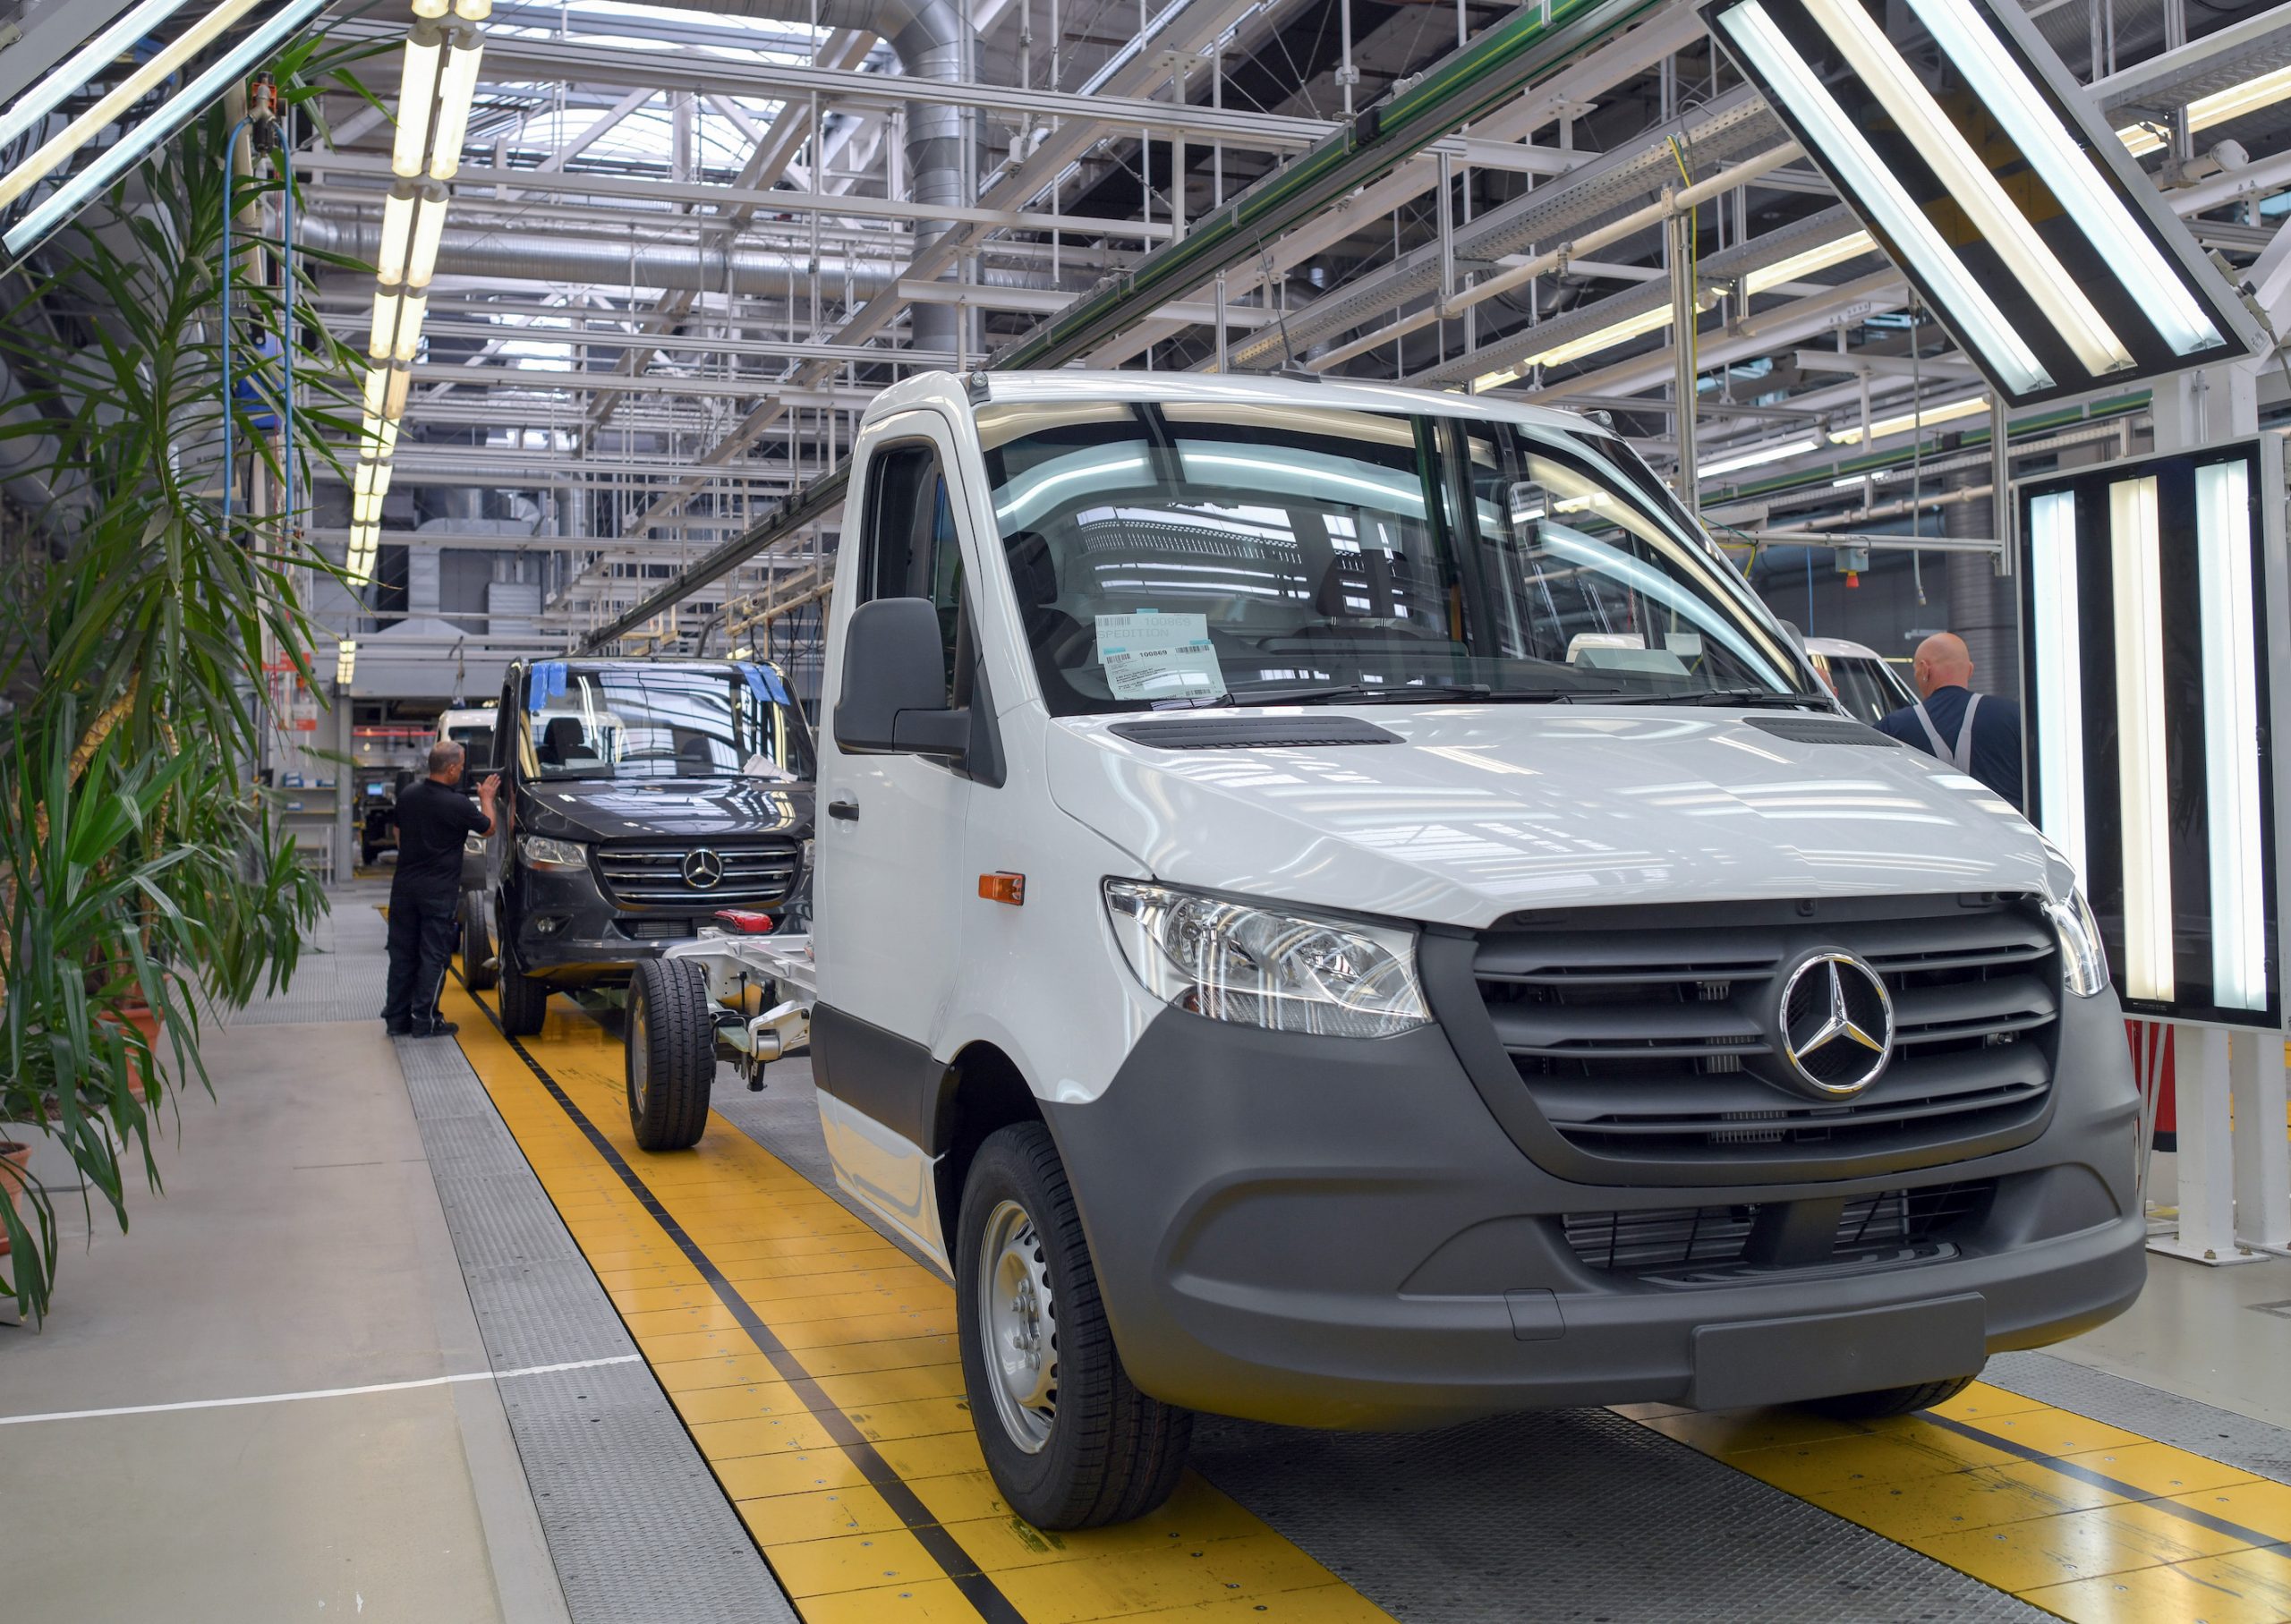 Commercial vehicles of the Sprinter type are built at the Mercedes-Benz AG Ludwigsfelde plant